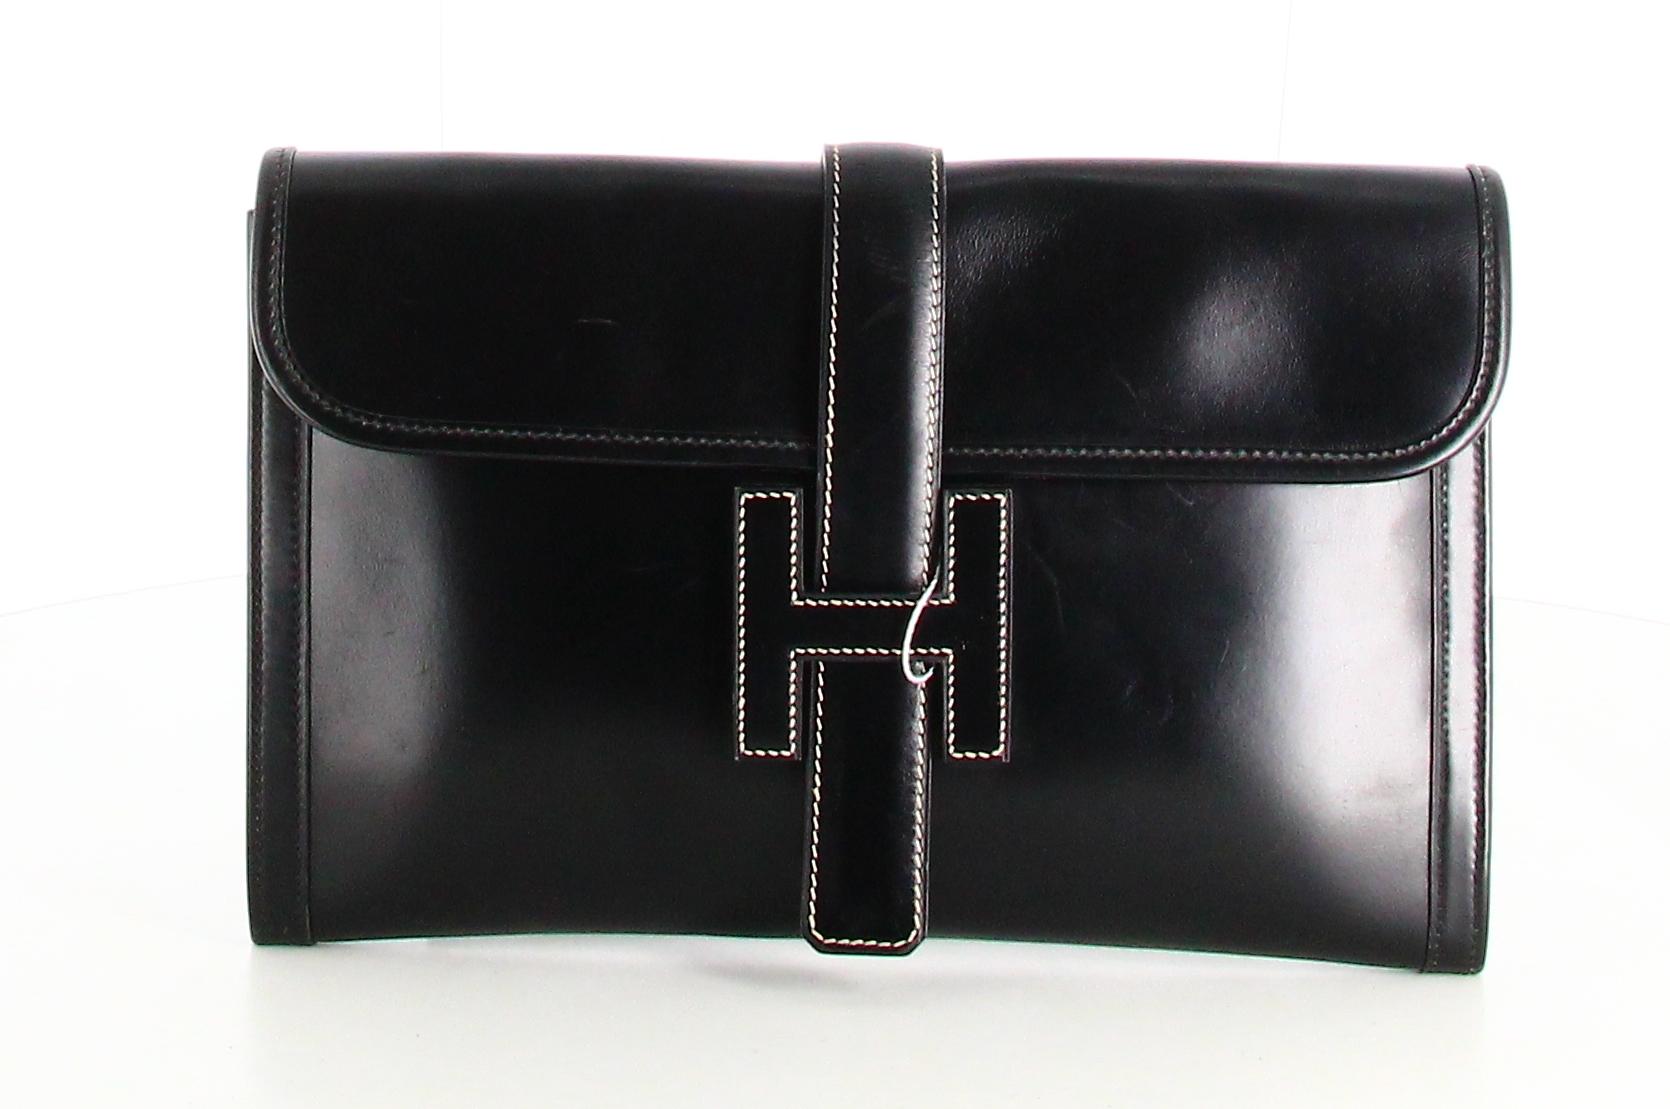 1988 Hermès Jige PM Clutch Bag Black Leather

- Good condition. Slight traces of wear over time. 
- Hermès Clutch bag 
- Black leather 
- Clasp: black leather hanse with H logo 
- Interior: Beige canvas